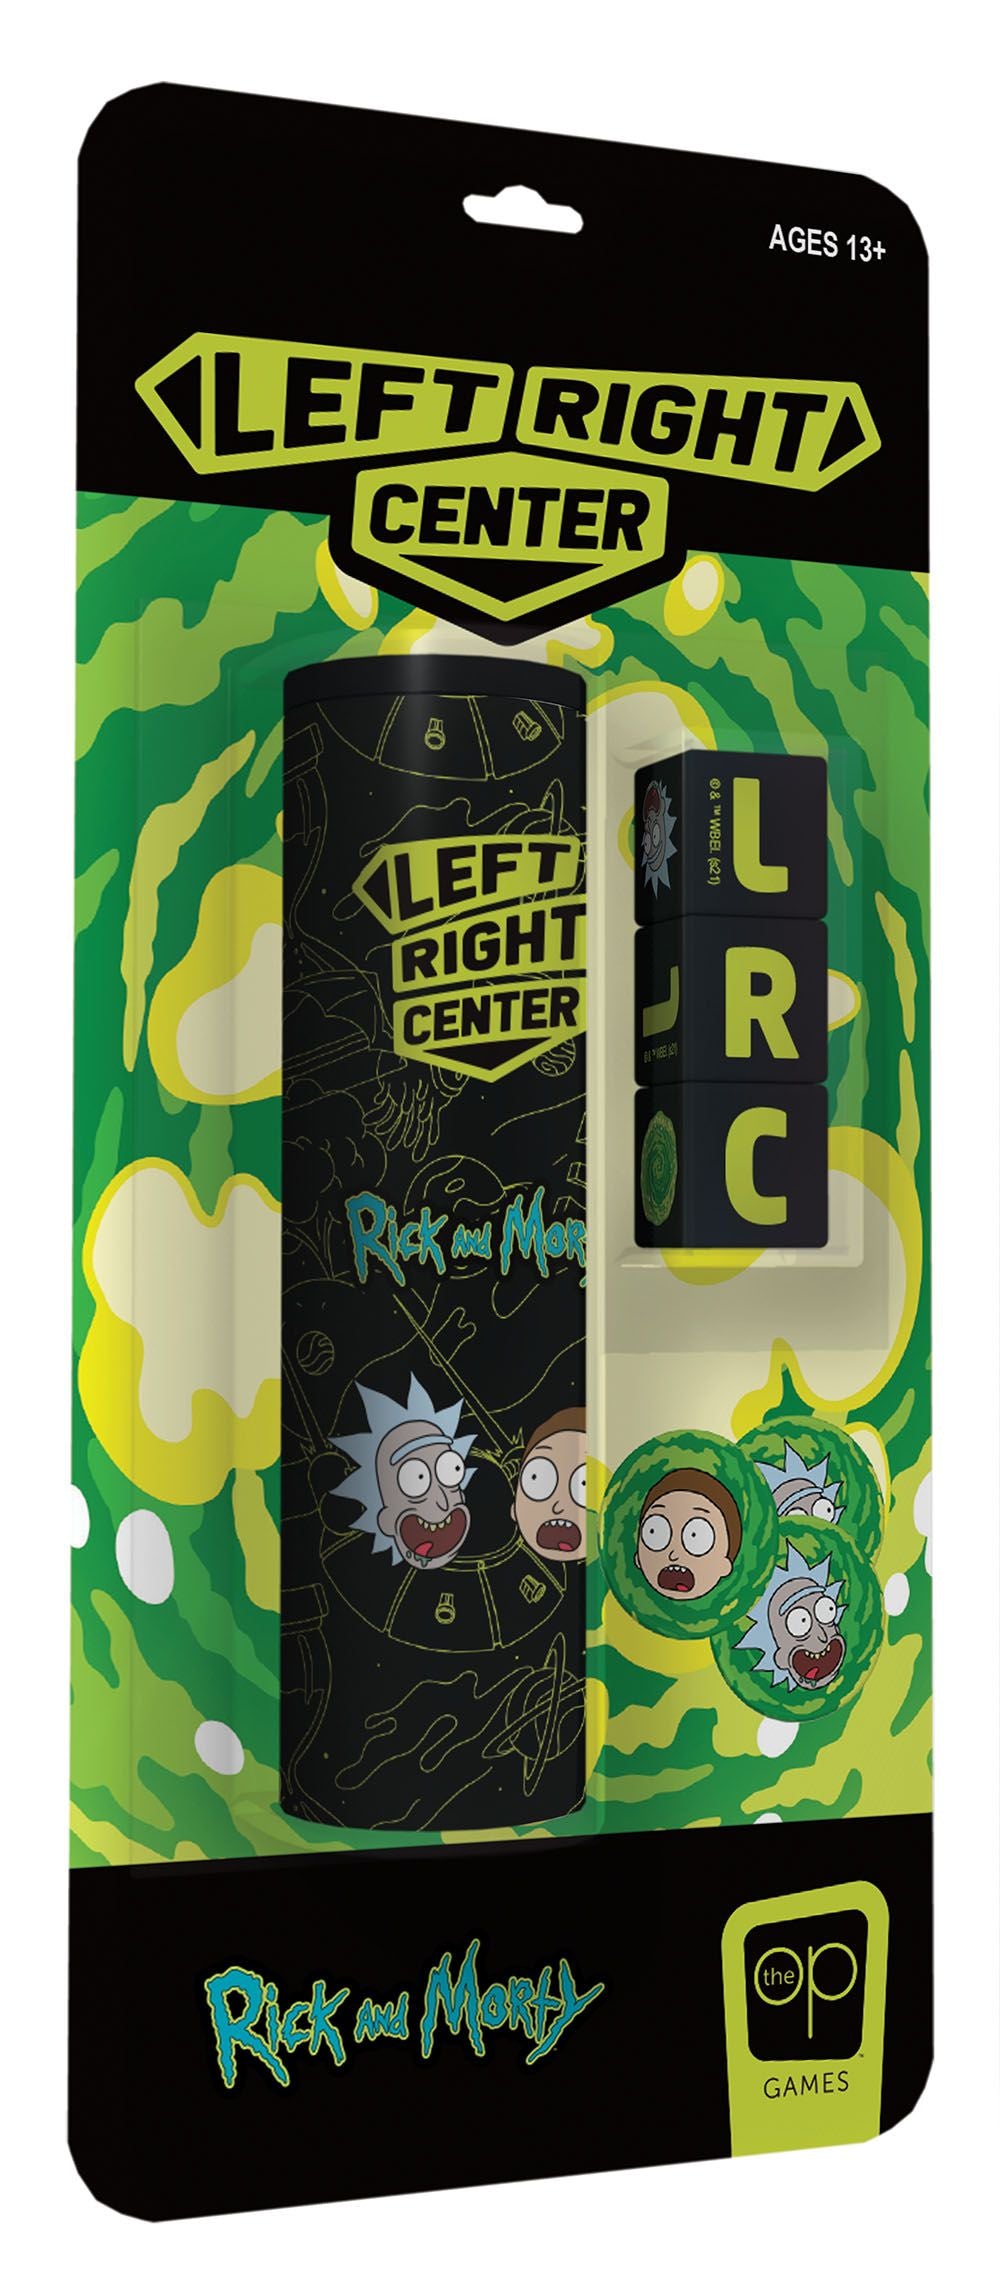 Left Right Center: Rick and Morty